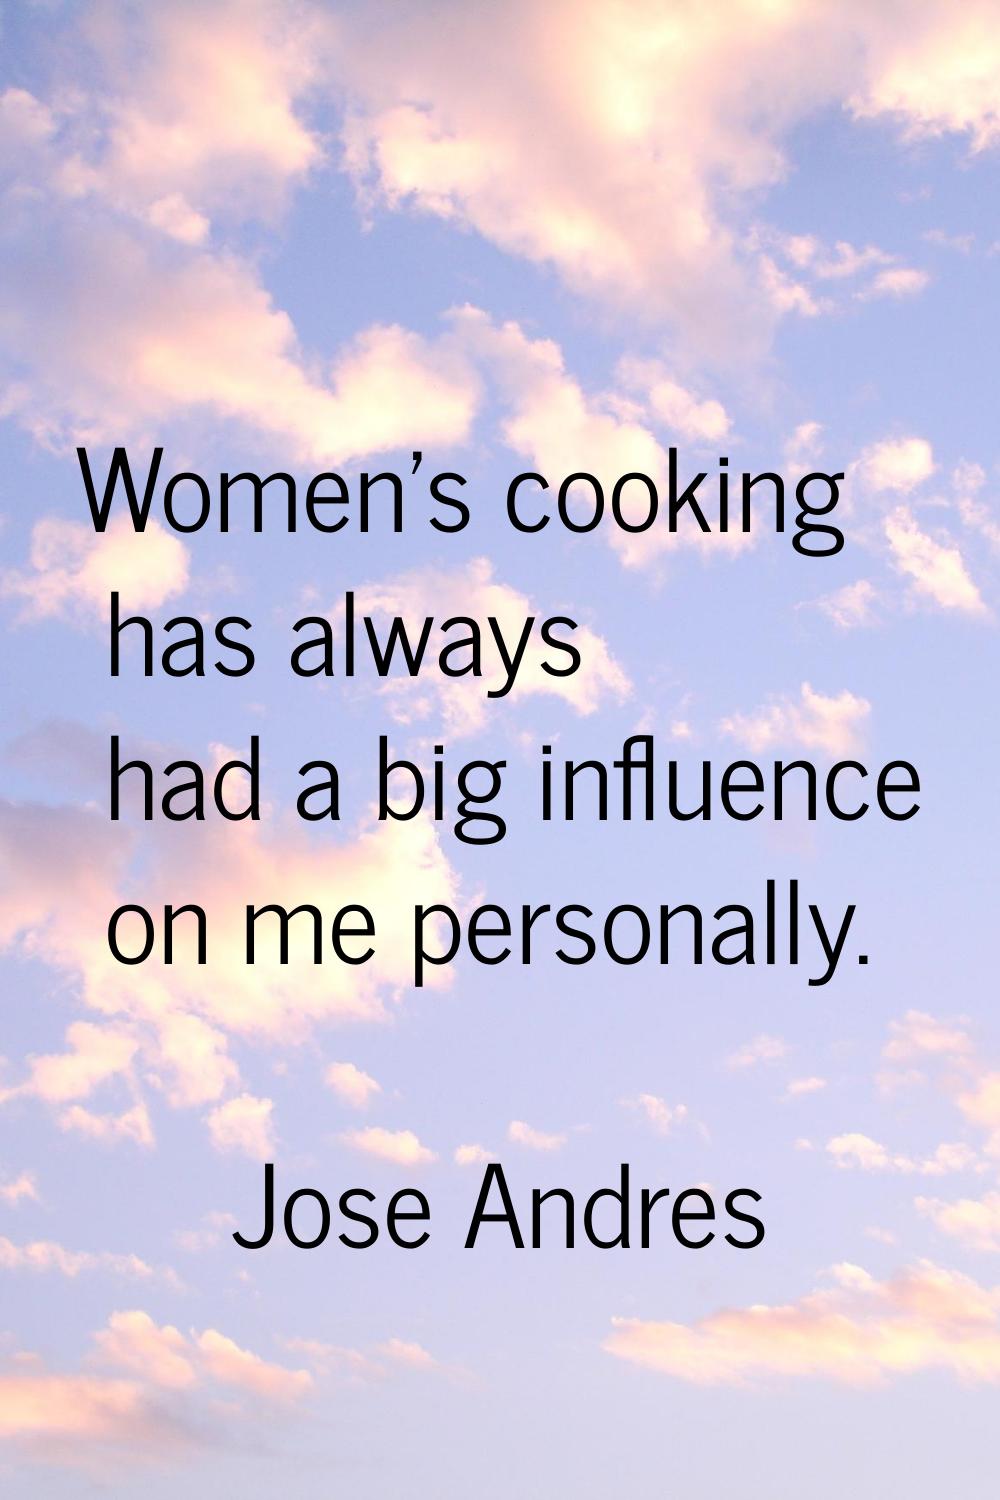 Women's cooking has always had a big influence on me personally.